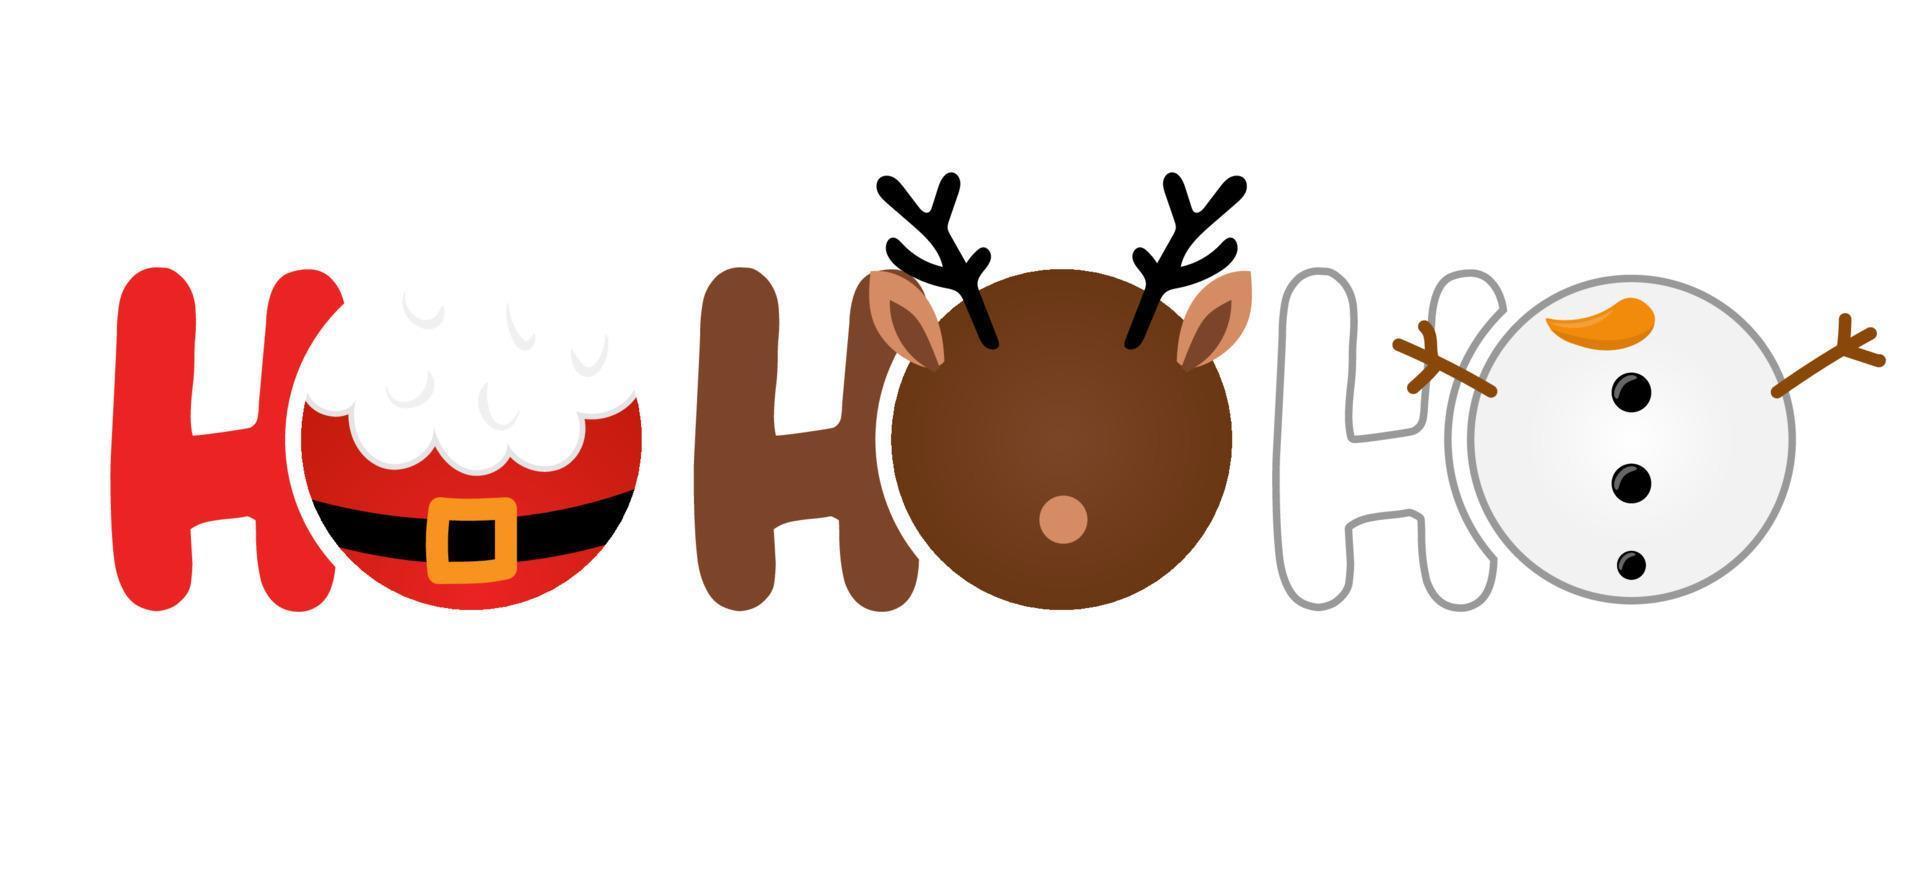 https://static.vecteezy.com/system/resources/previews/012/763/616/non_2x/ho-ho-ho-text-with-symbols-santa-reindeer-and-snowman-with-threesome-funny-merry-christmas-quote-vector.jpg